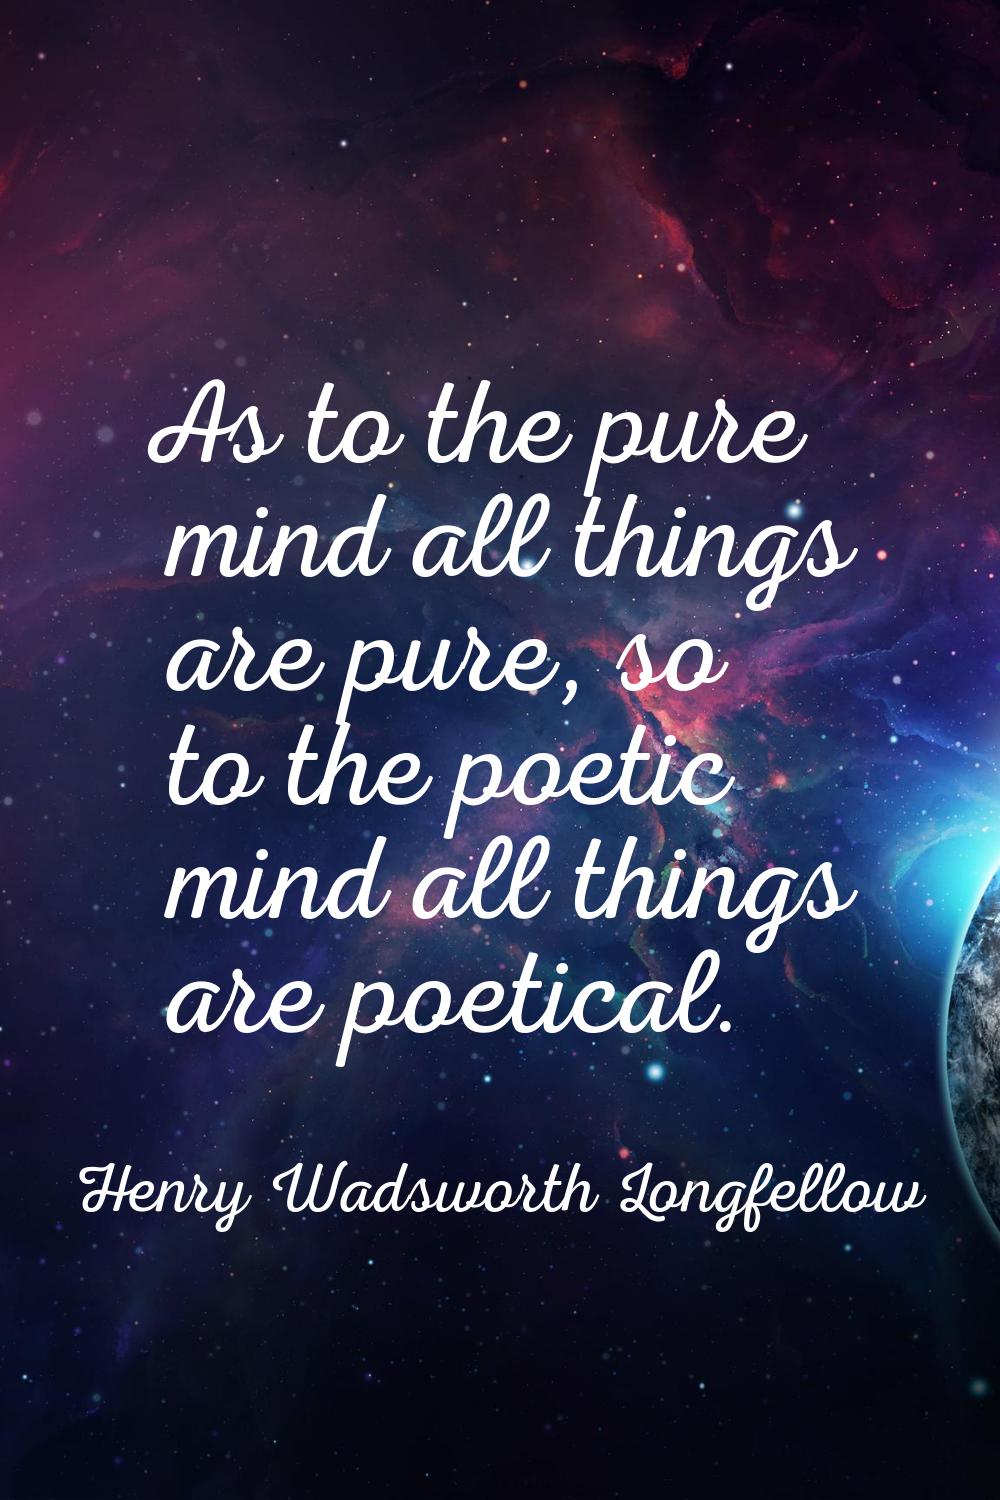 As to the pure mind all things are pure, so to the poetic mind all things are poetical.